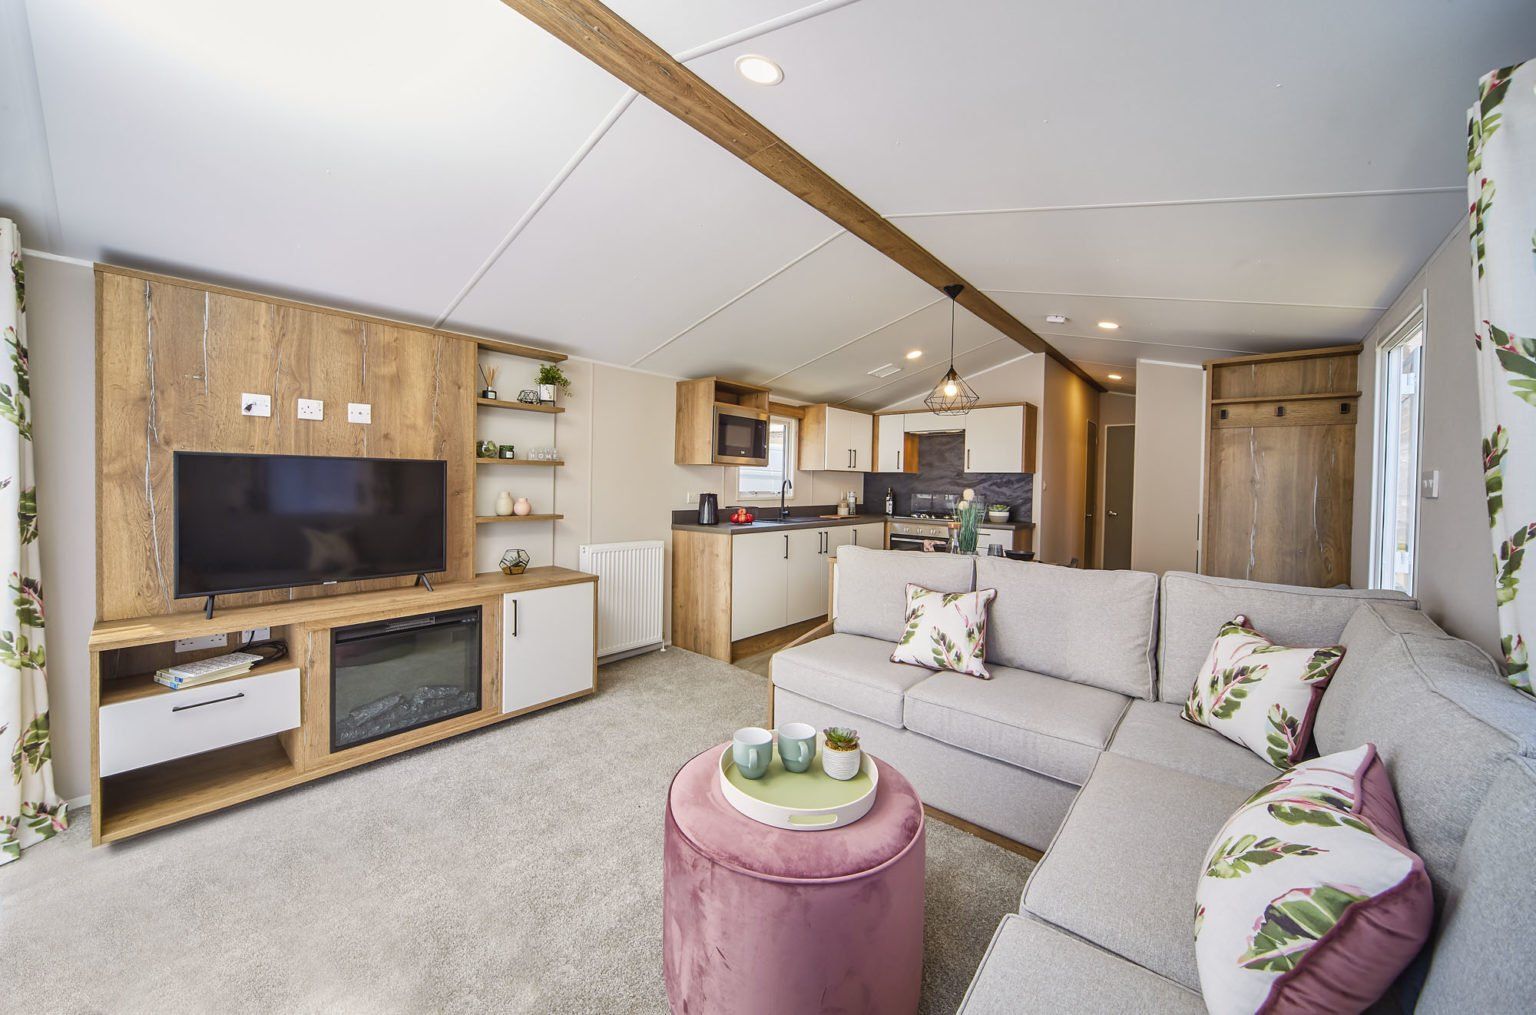 Holiday Homes for Sale at Pennymoor Caravan and Camping Park